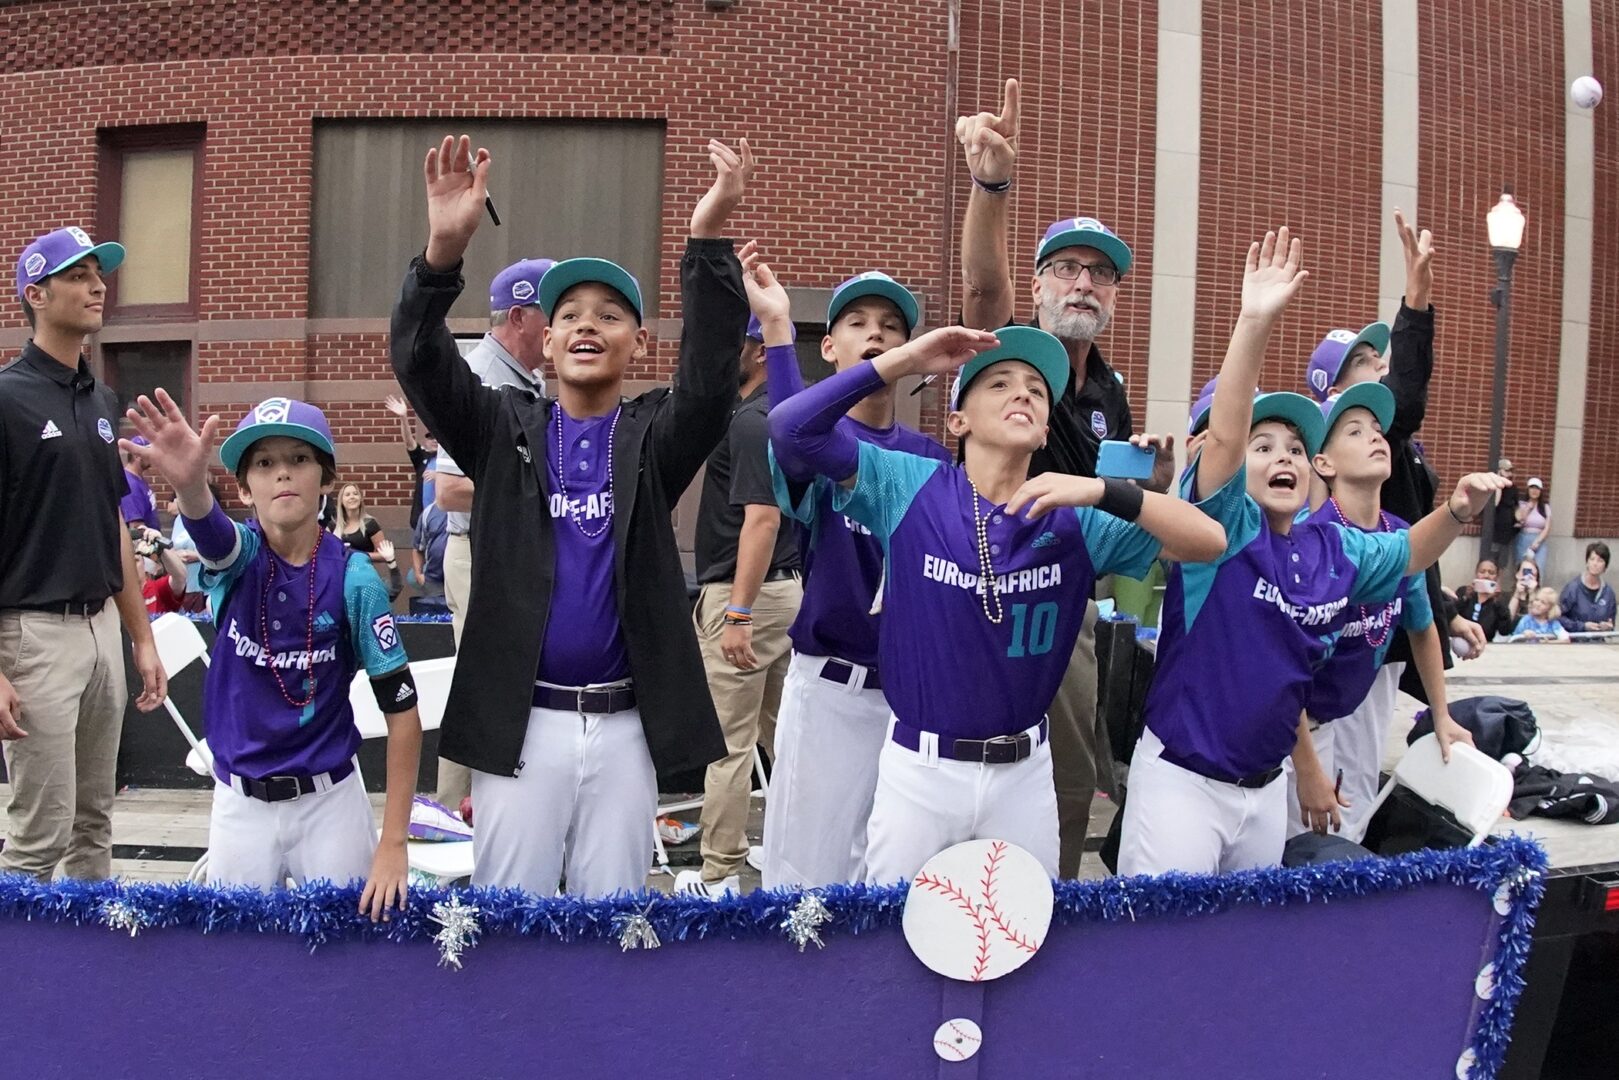 Little League World Series is back with 4 more teams in Williamsport